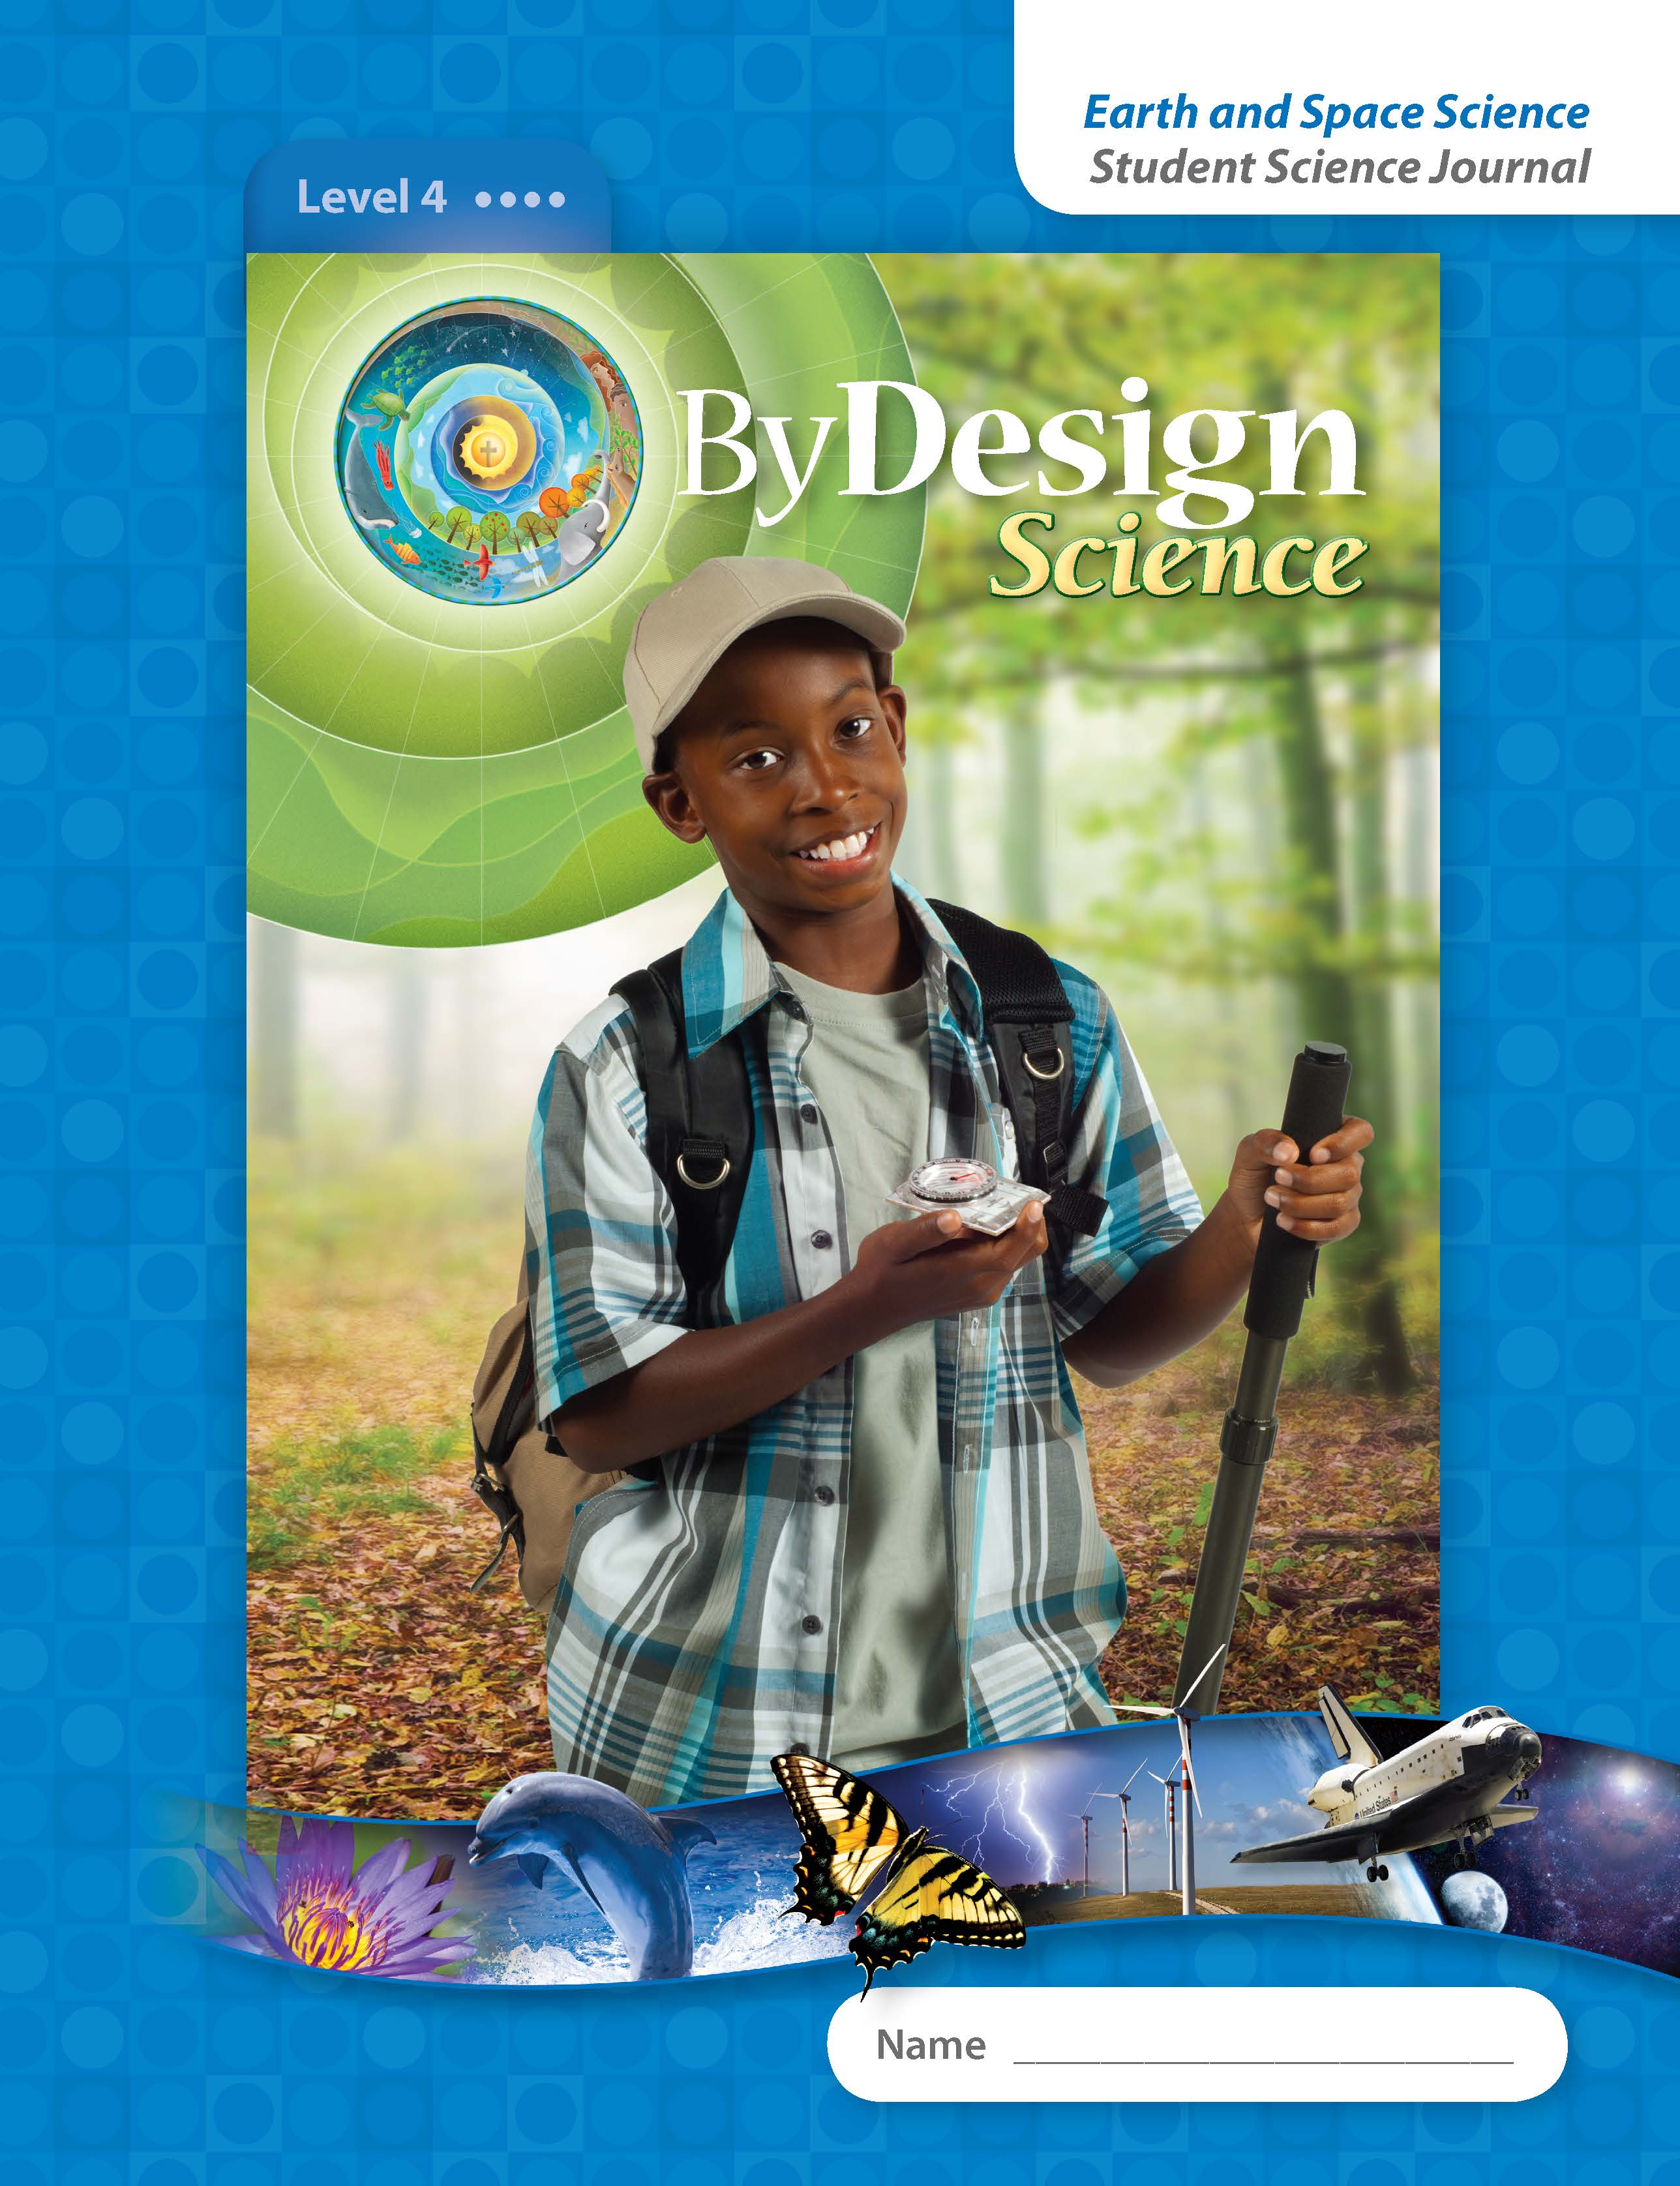 By Design Grade 4 Student Science Journal 1 Year License